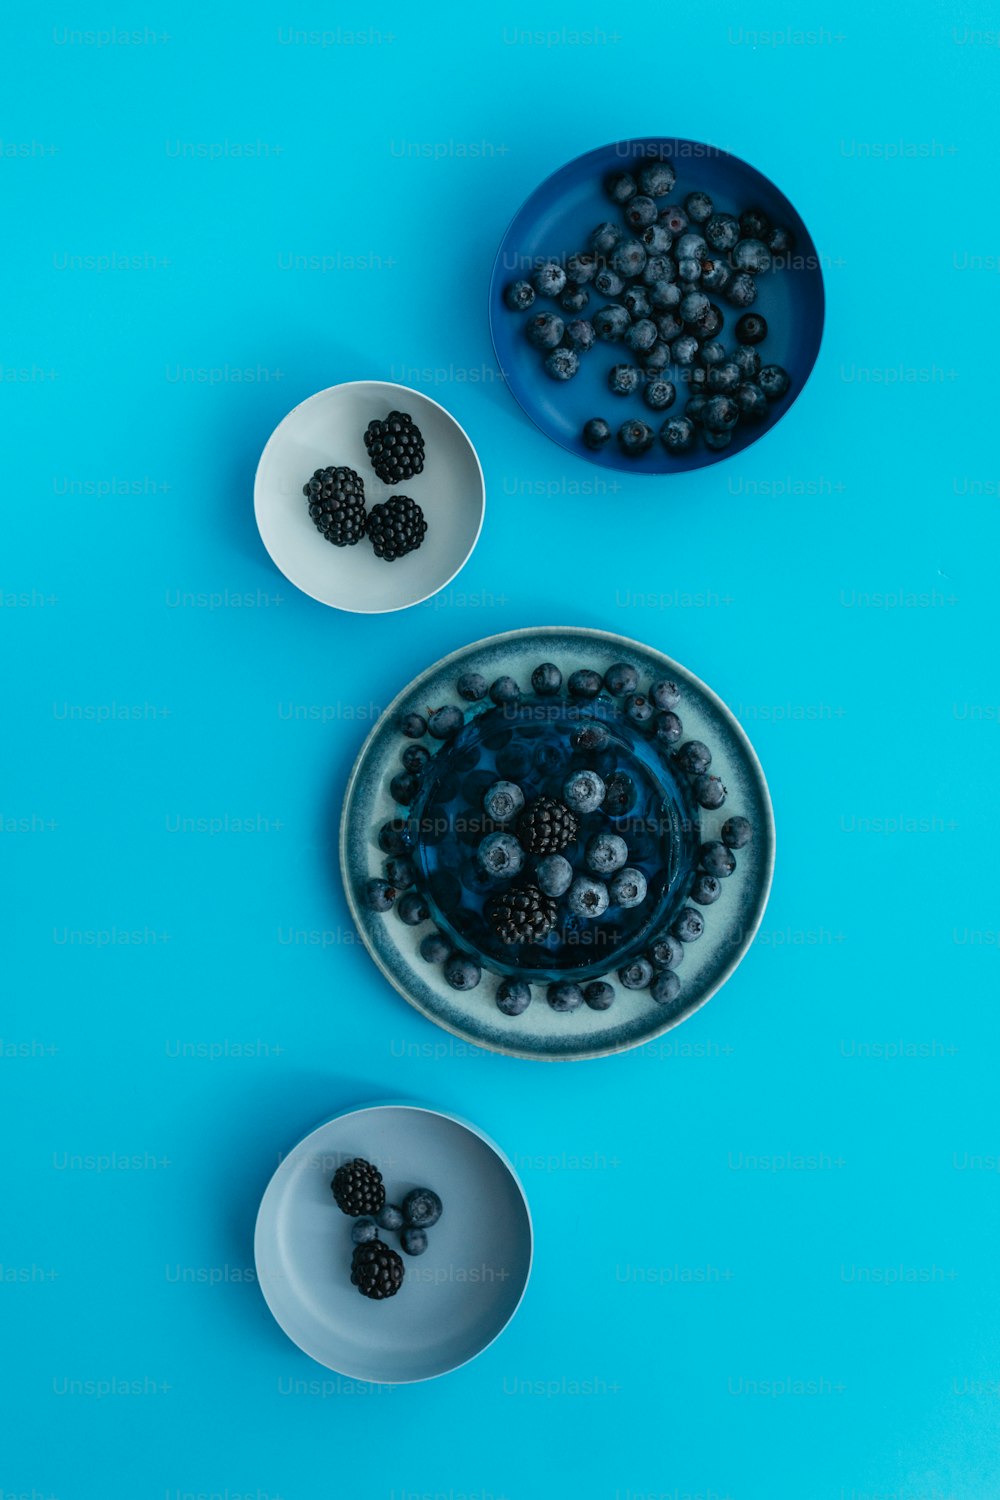 a bowl of berries and a bowl of blackberries on a blue background